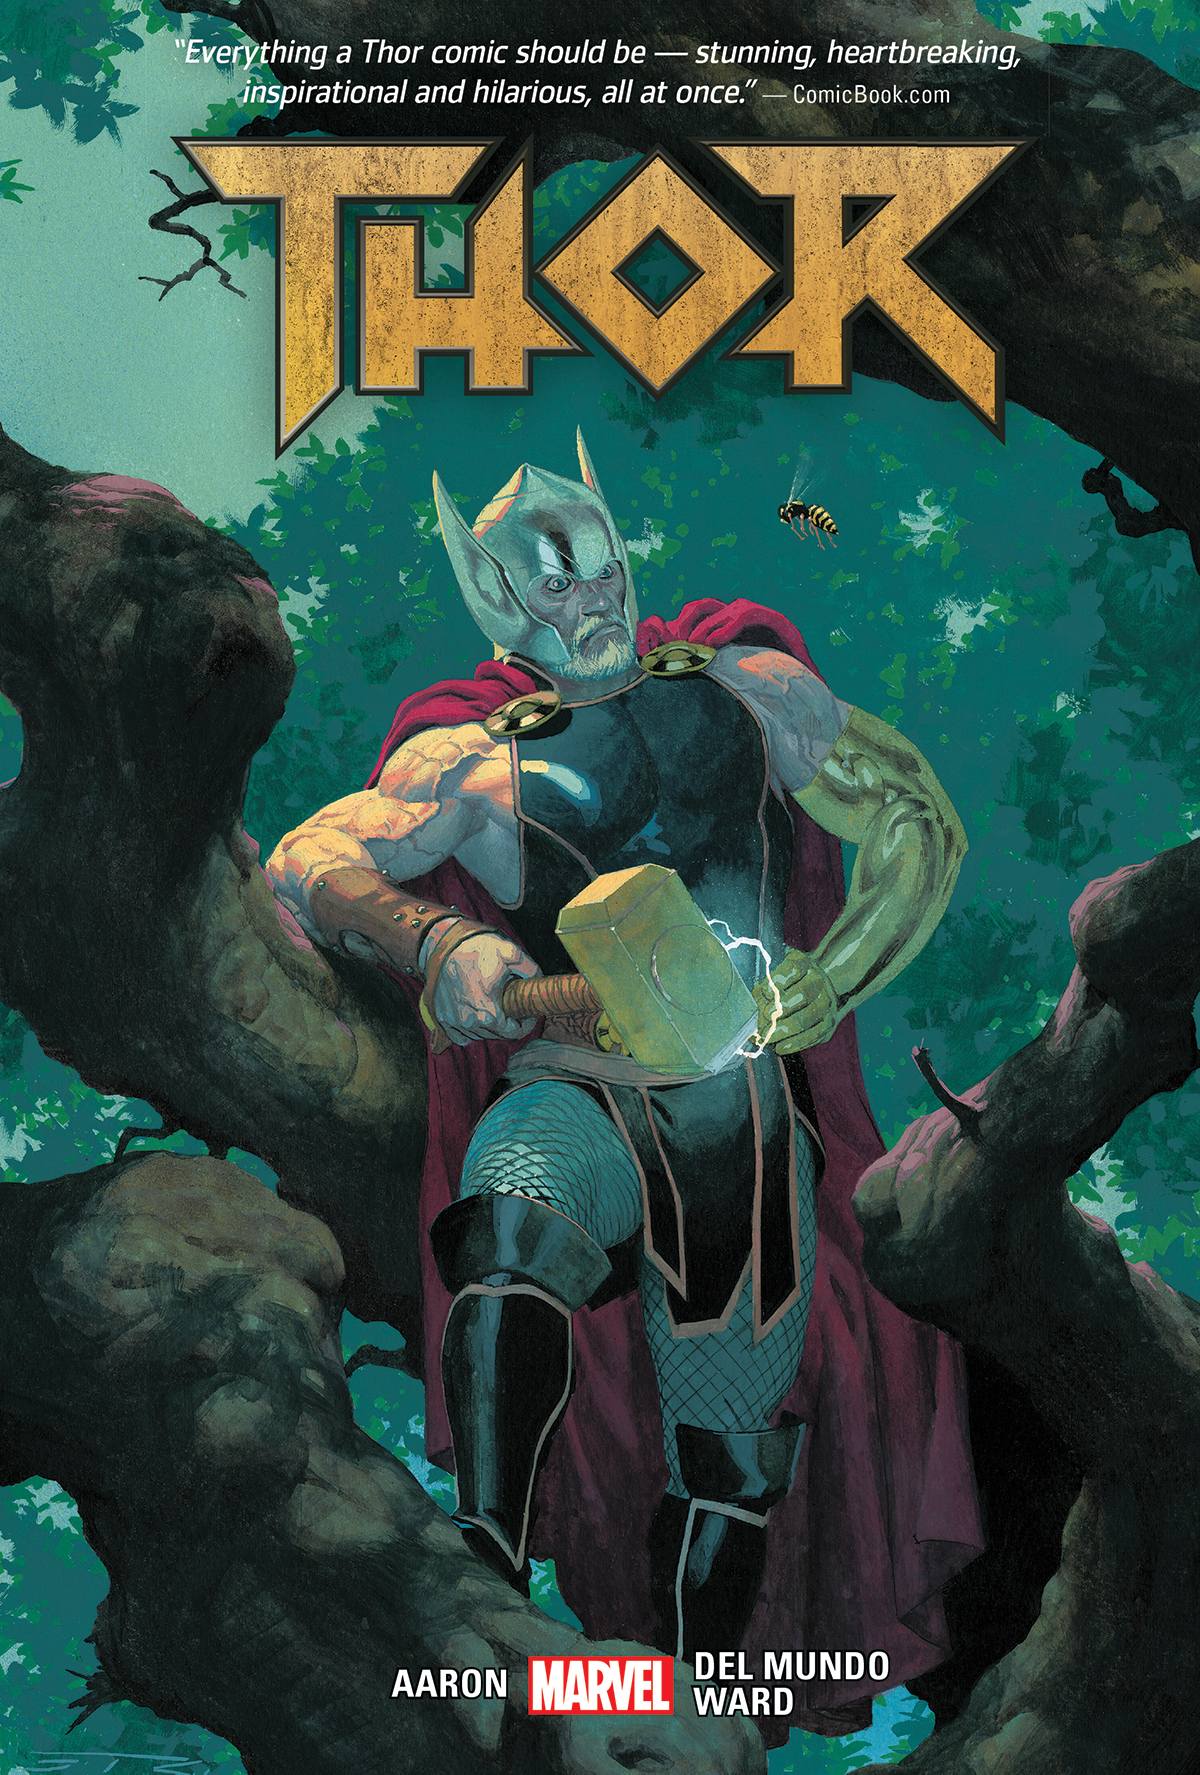 Thor by Jason Aaron Vol. 4 (Trade Paperback)